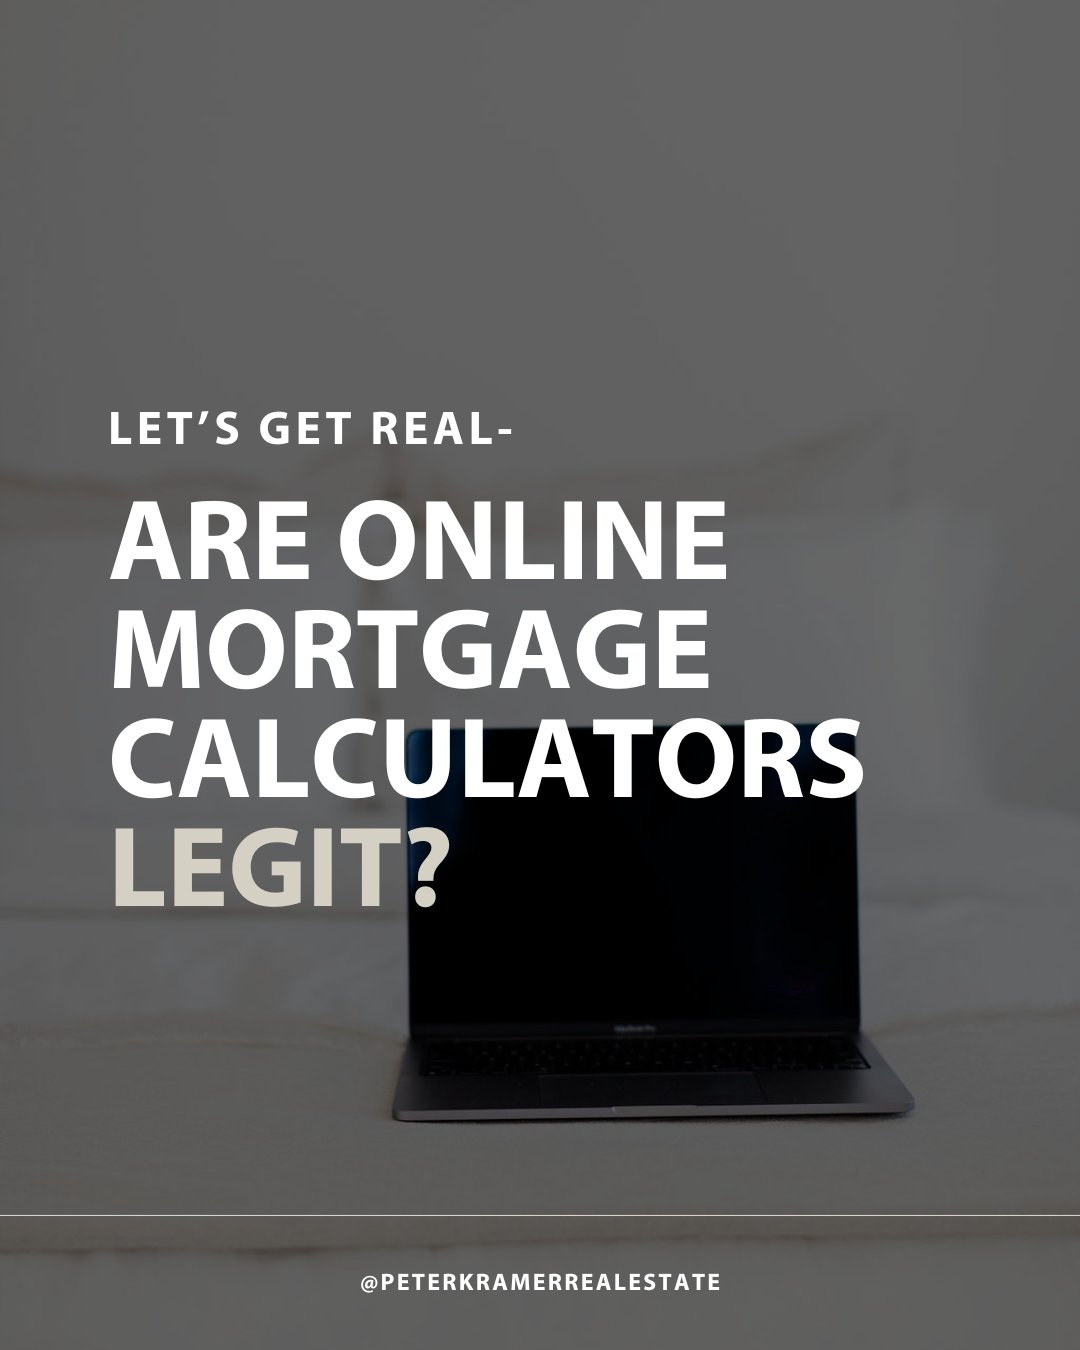 Before you take what online mortgage calculators say as fact, know this: interest rates and finance products are incredibly personalised. One size *does not* fit all. 

DM me and I'll introduce you to the best broker in the business.